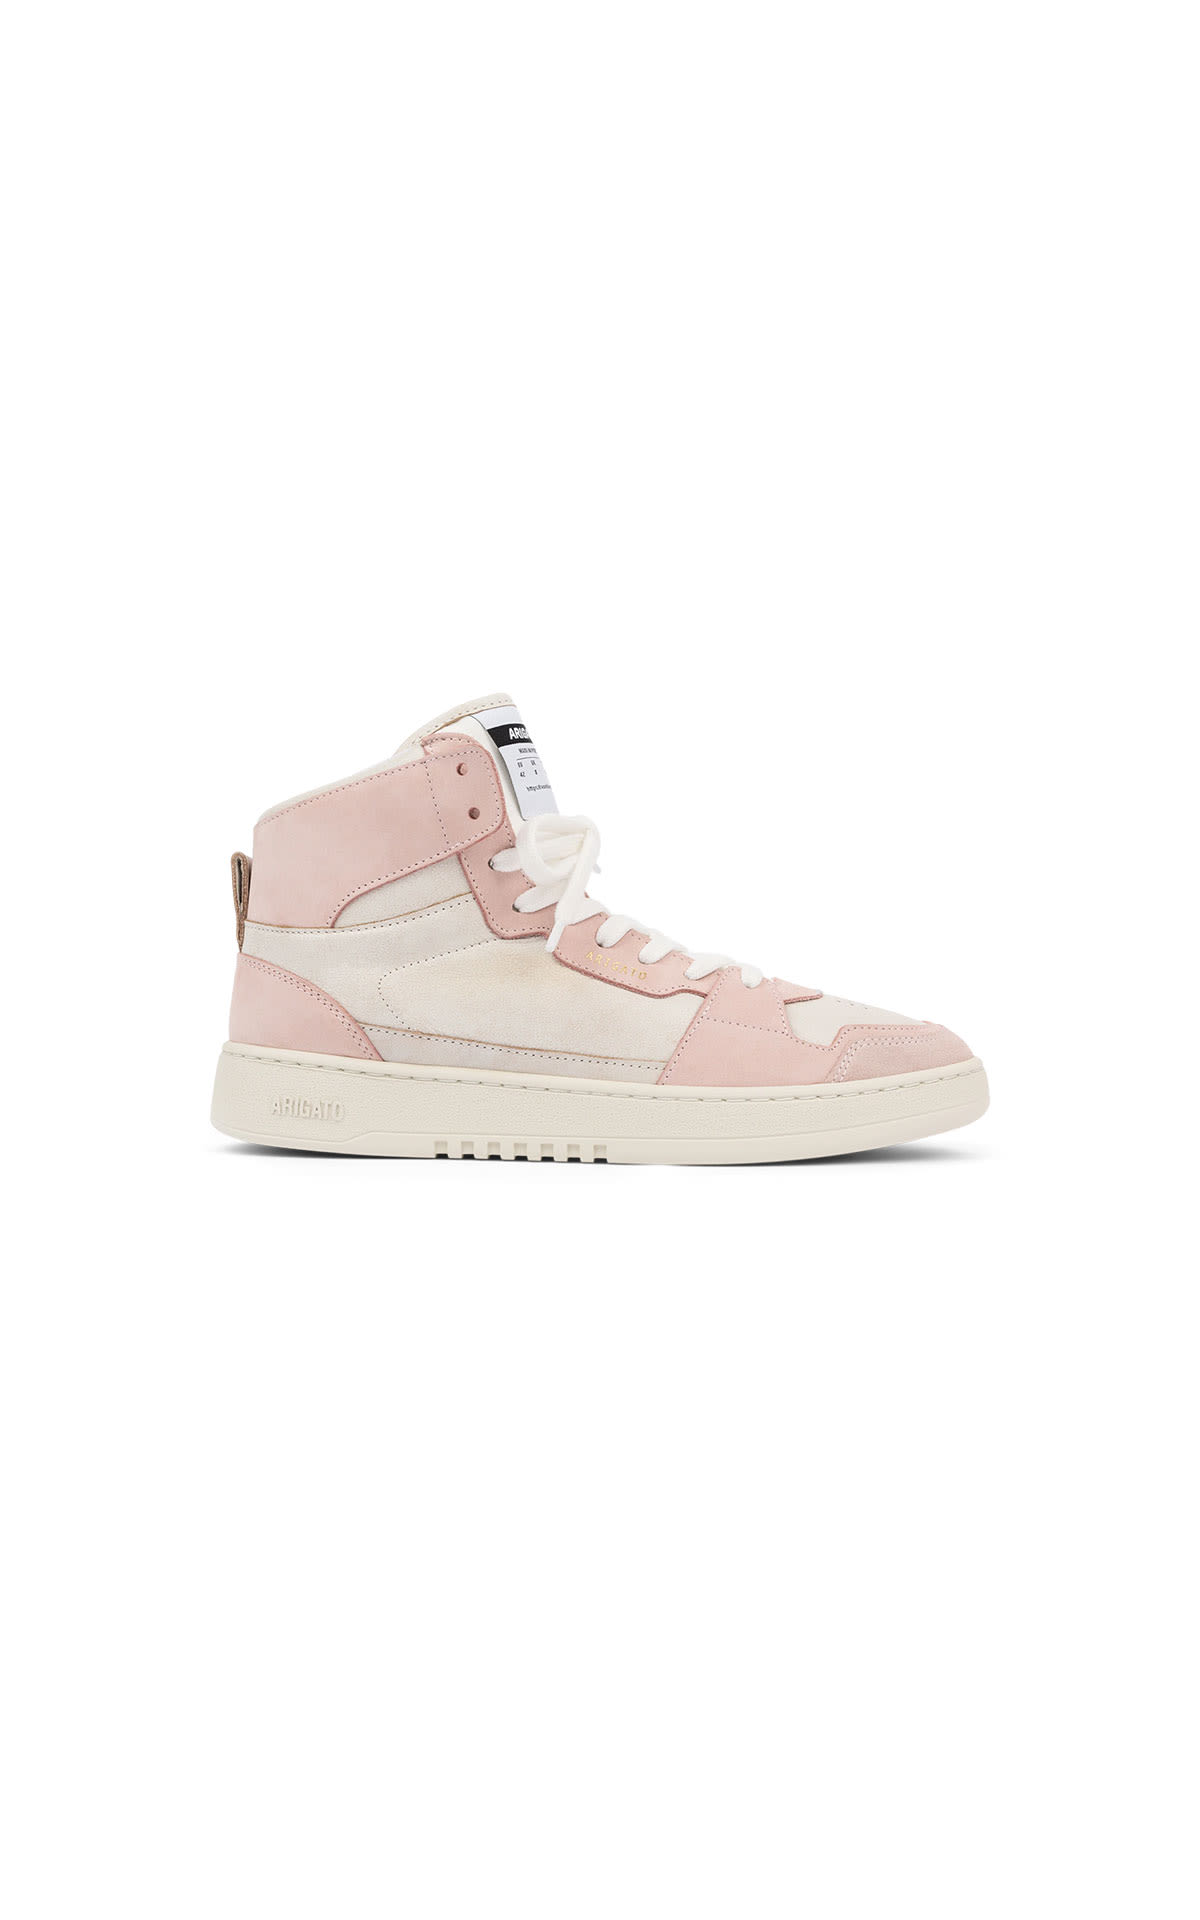 Axel Arigato Dice hi sneaker womens from Bicester Village